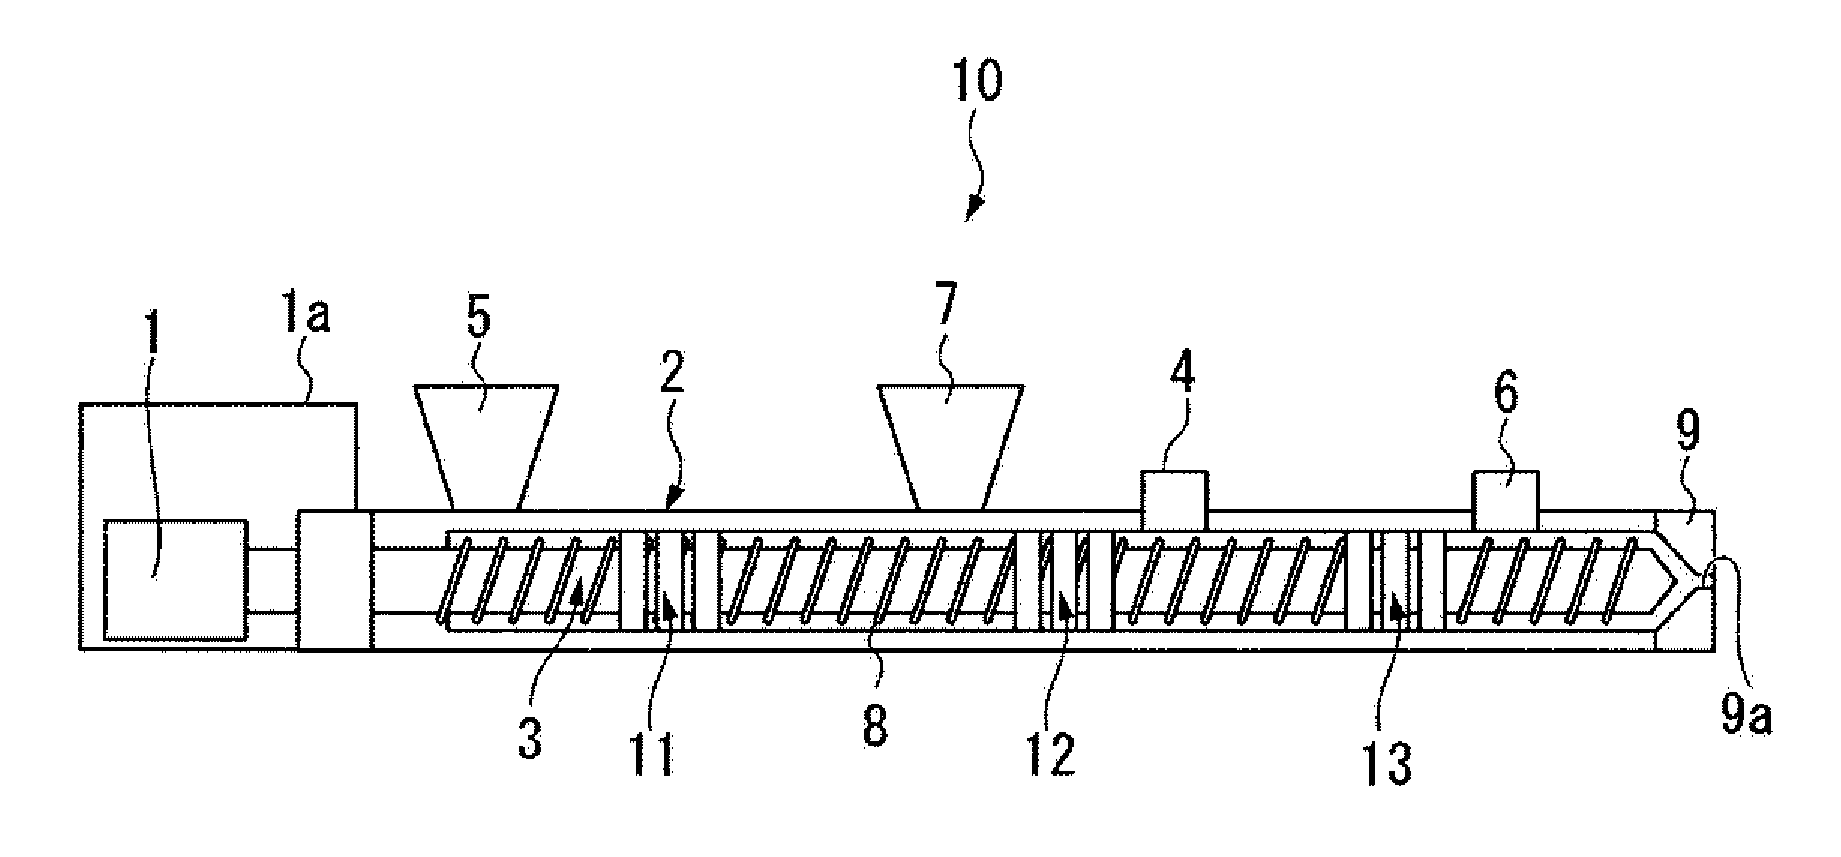 Liquid crystal polyester composition, method for producing liquid crystal polyester composition, and molded article